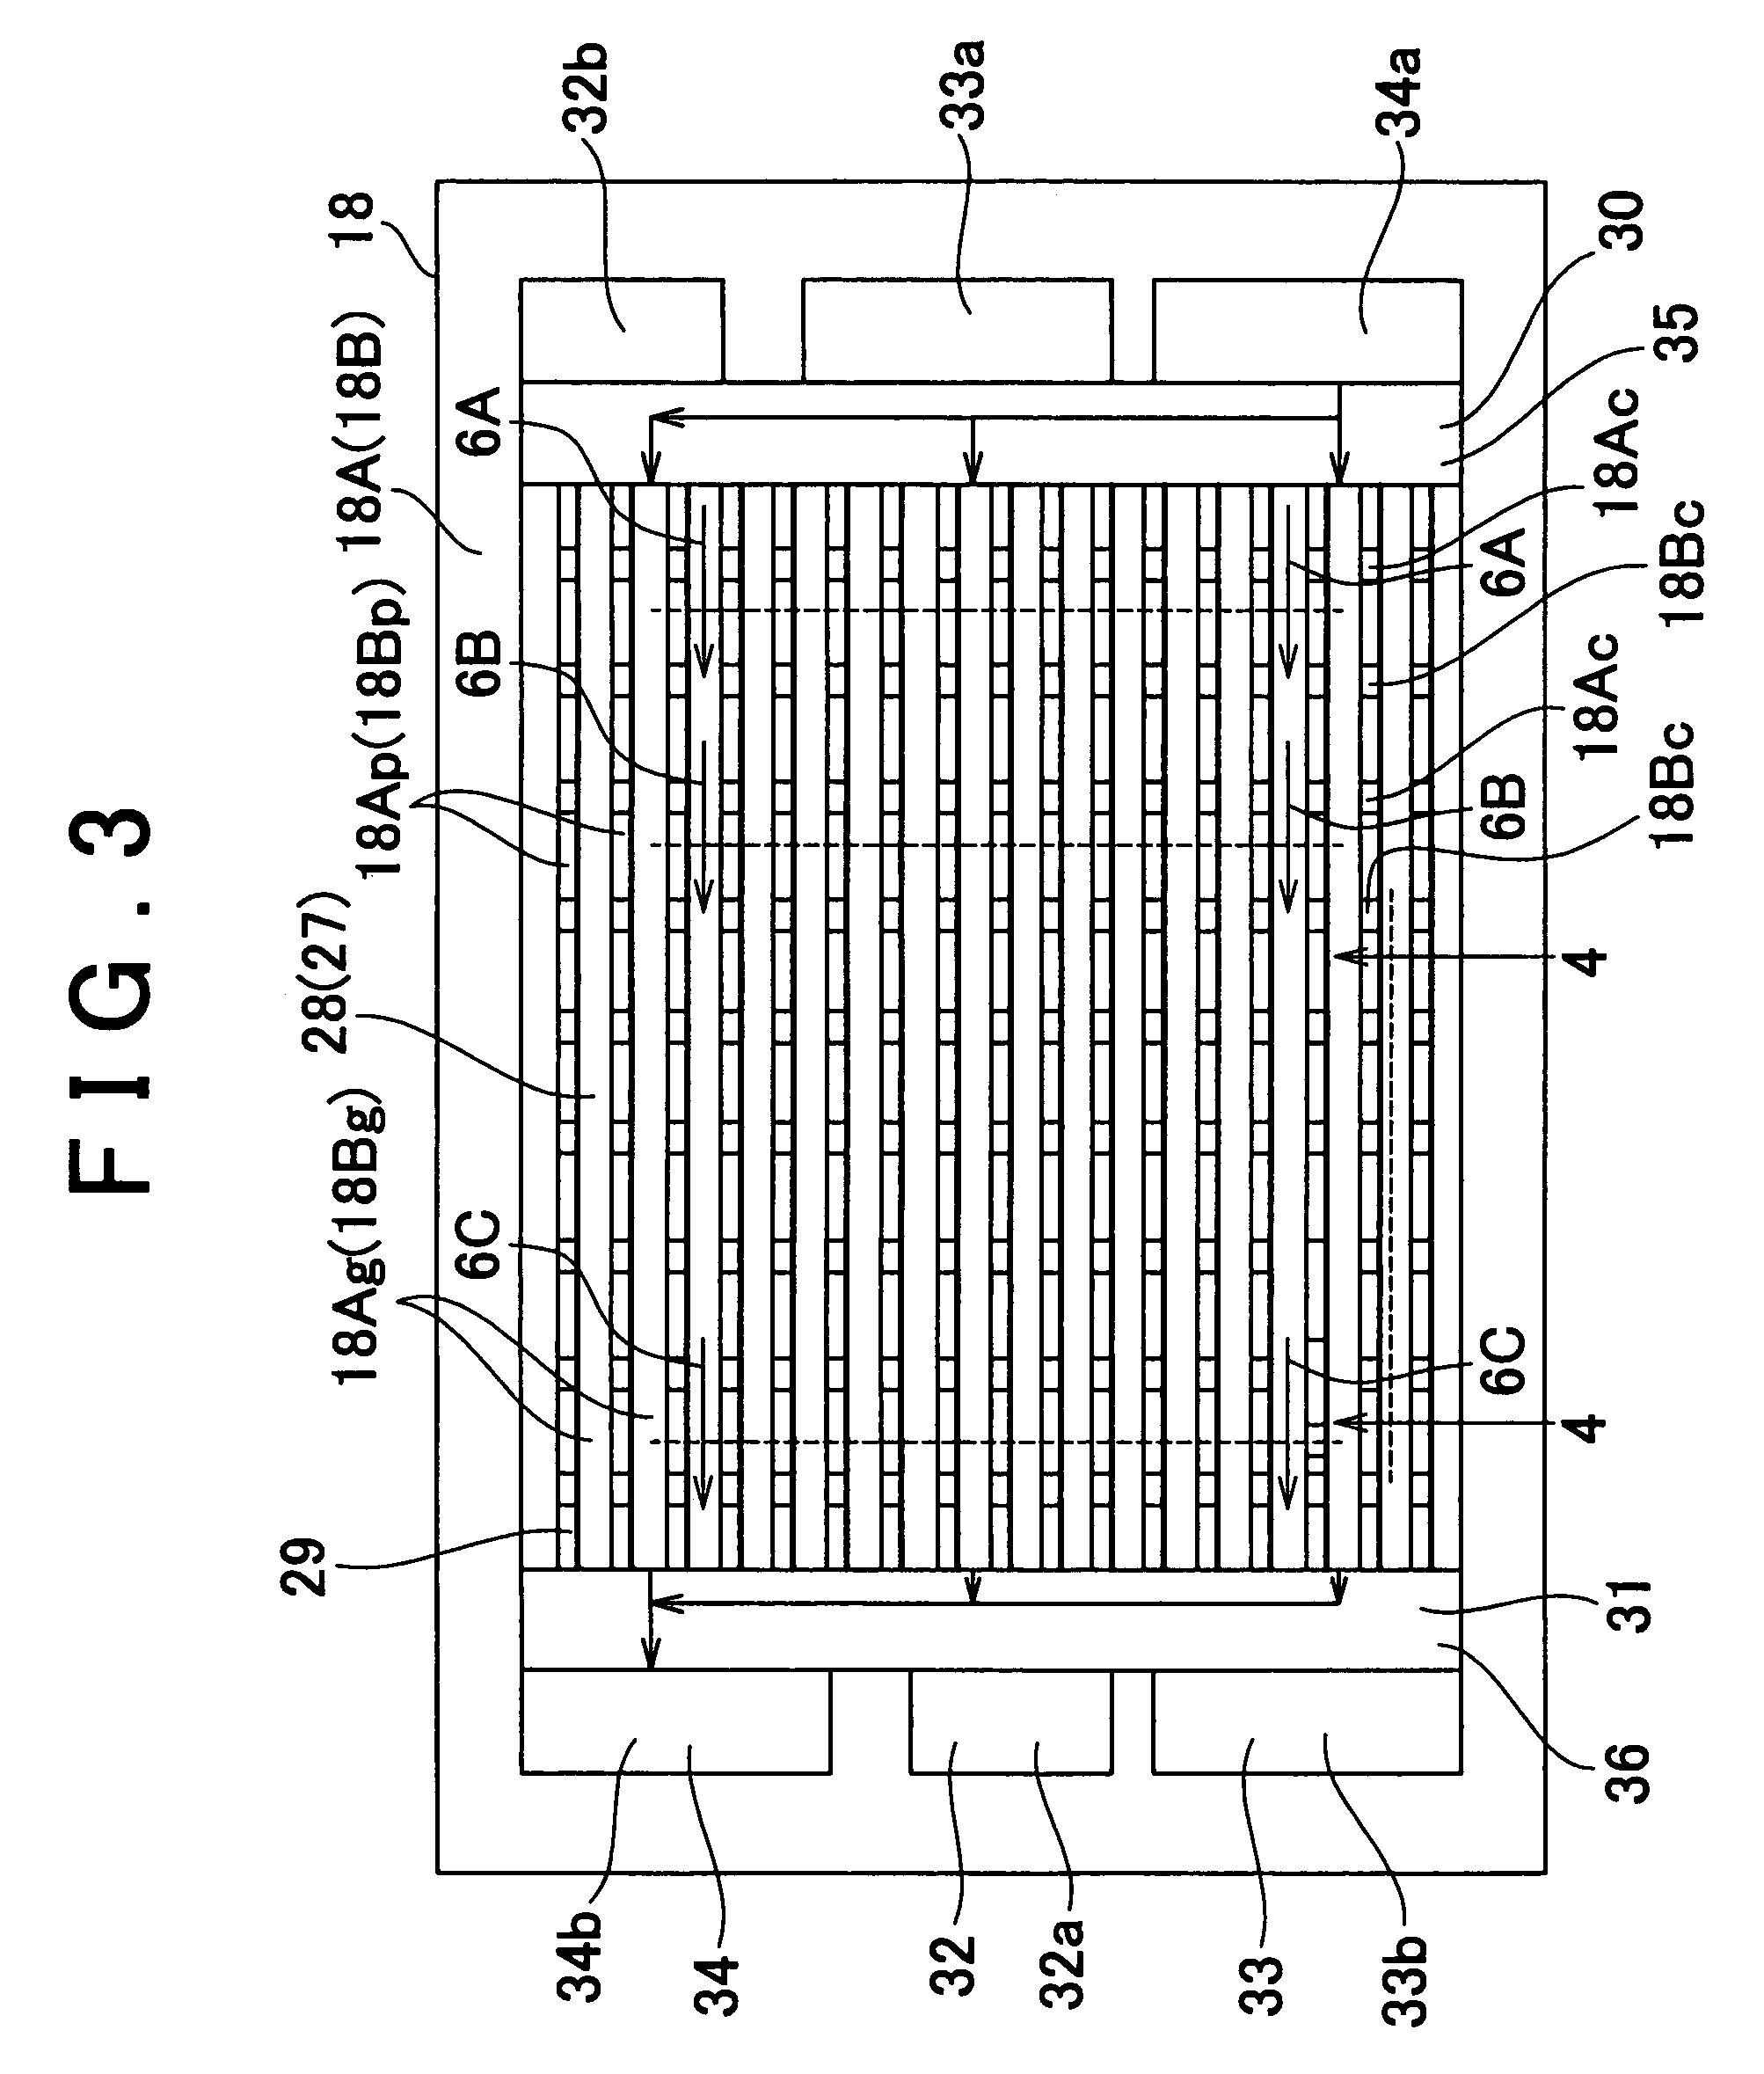 Separator passage structure of fuel cell